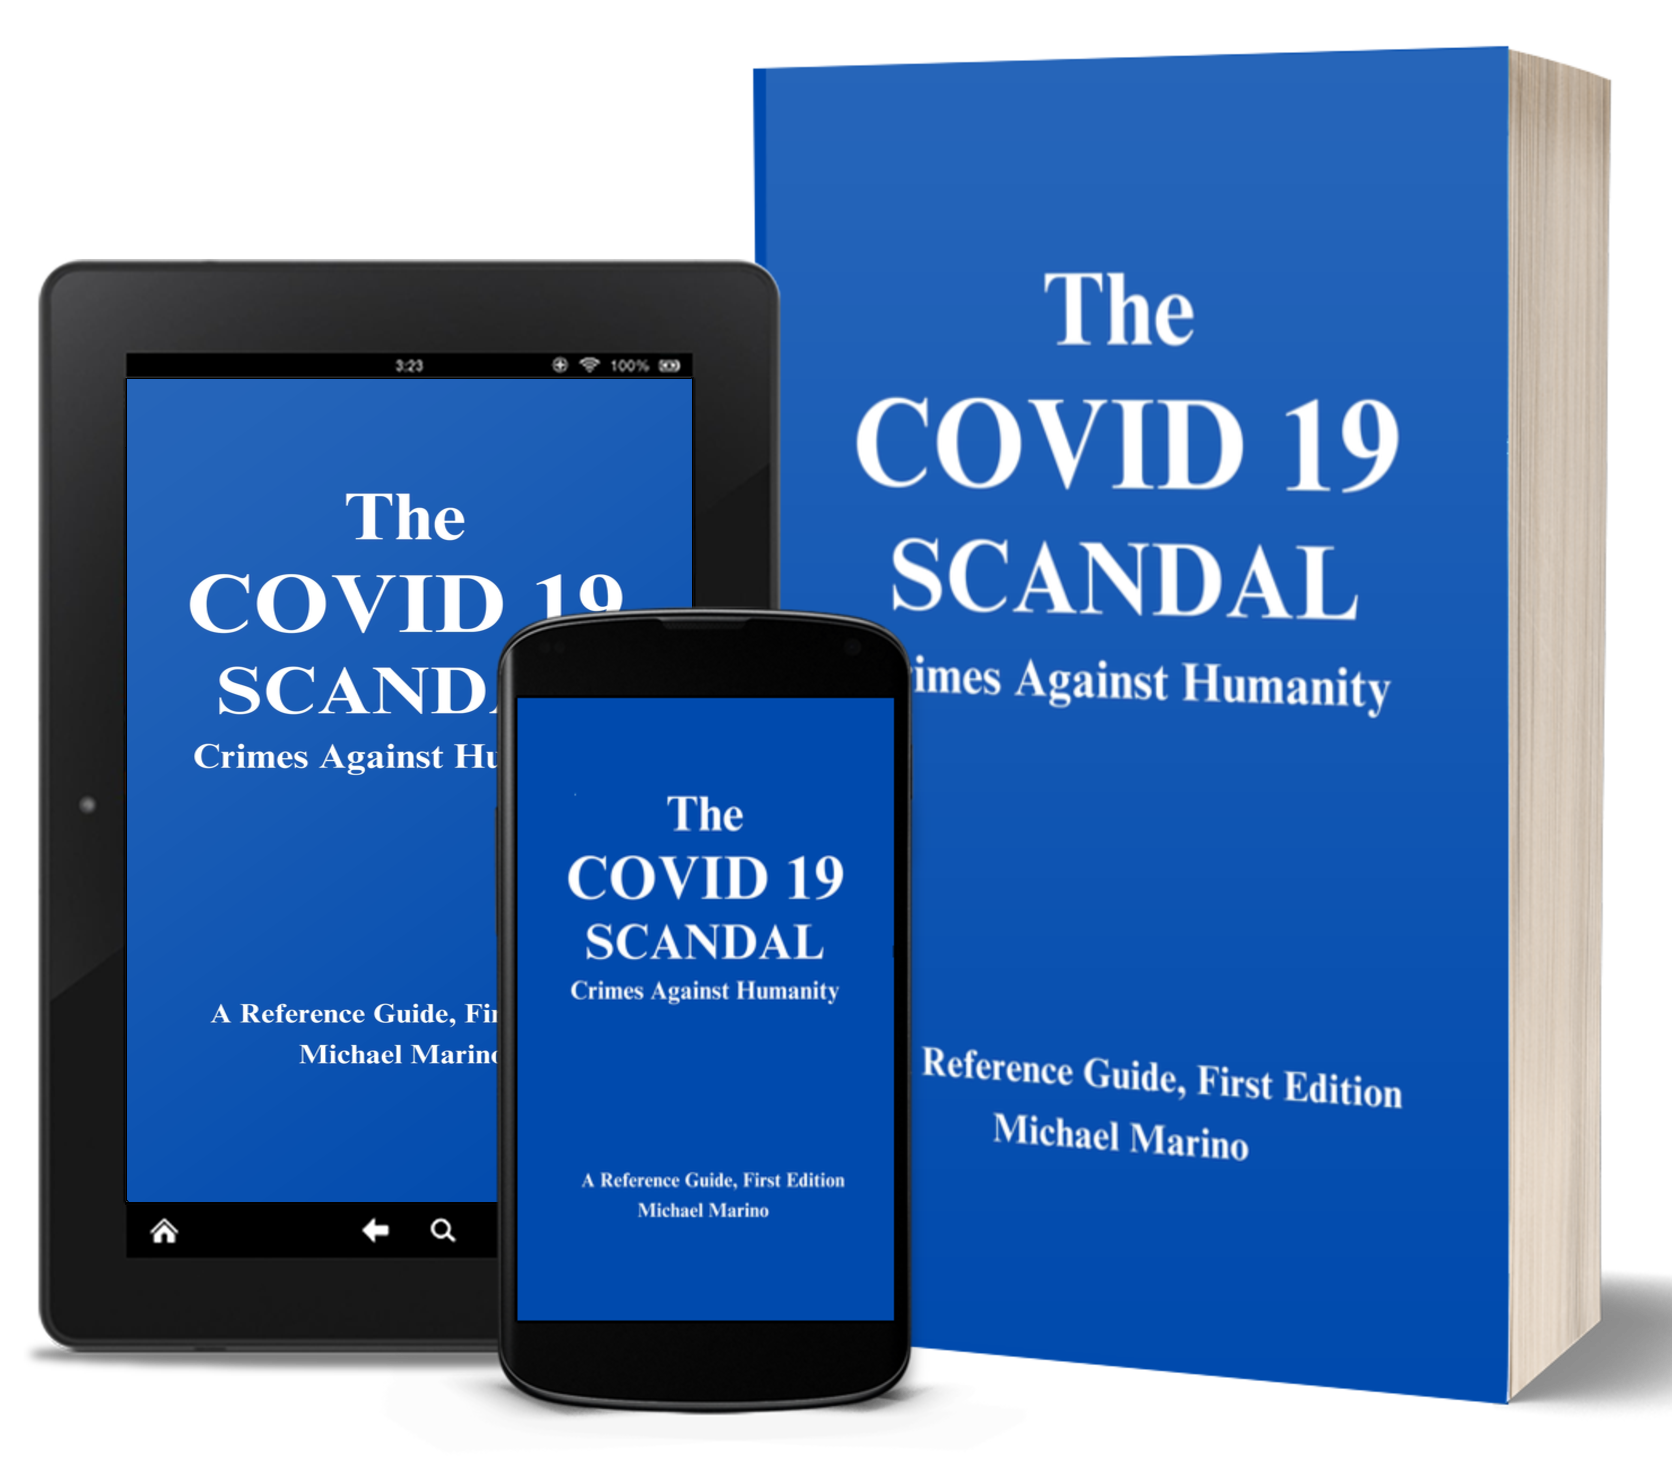 The COVID 19 SCANDAL - Crimes Against Humanity